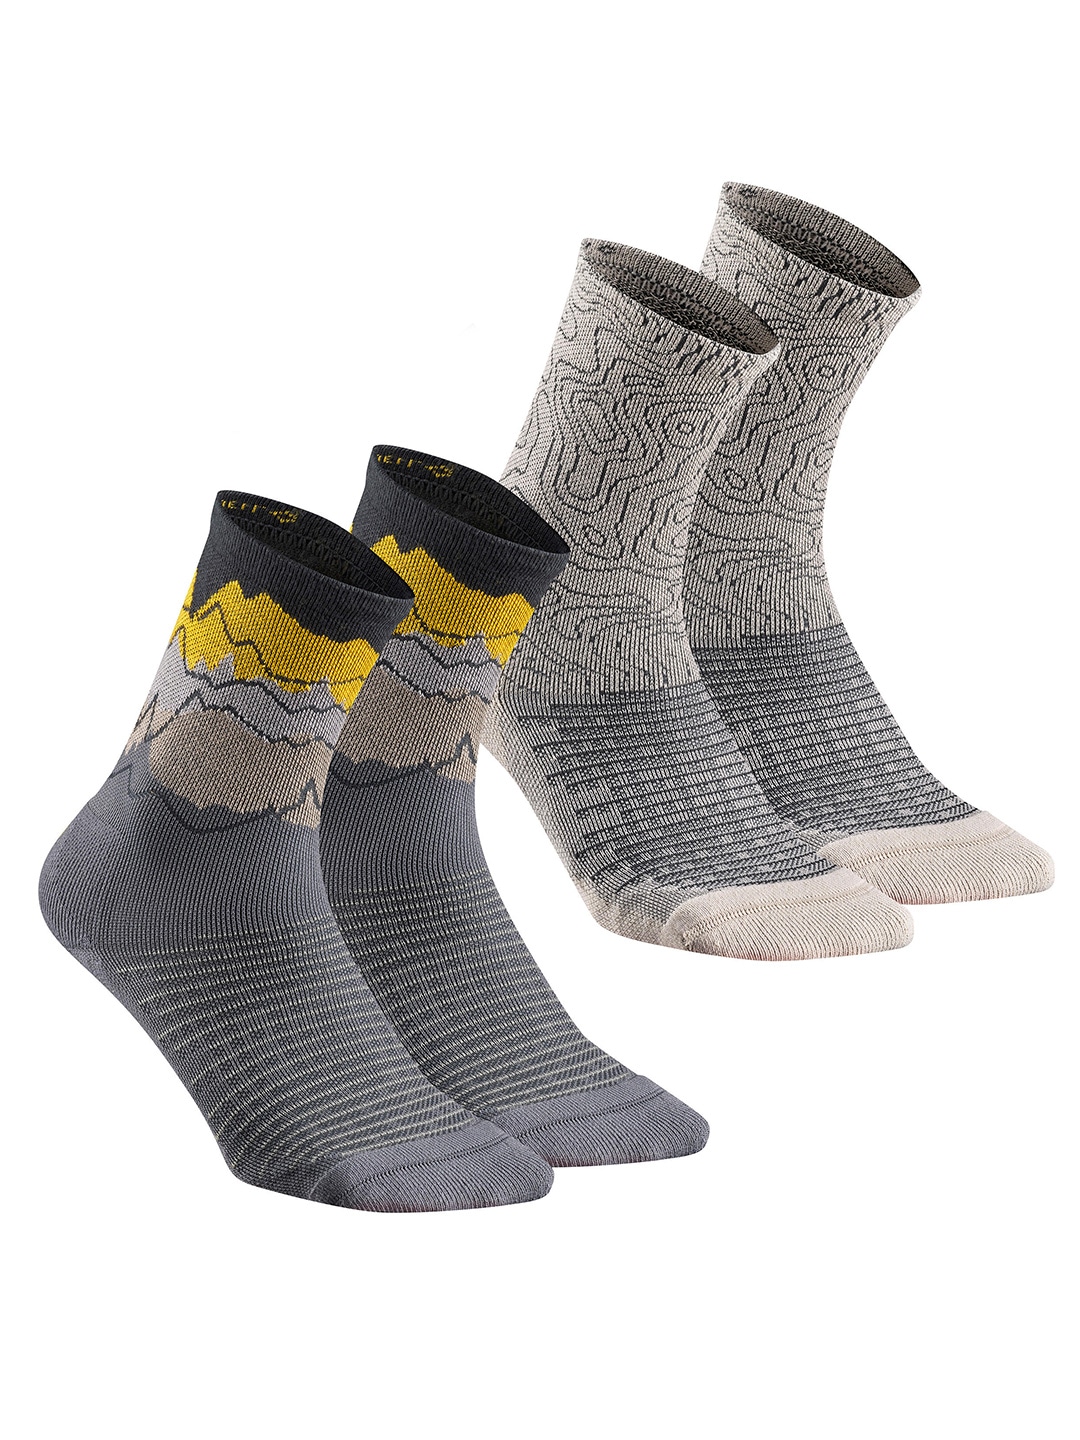 Accessories Socks | Quechua By Decathlon Unisex Pack Of 2 Patterned Limited Edition High Mountain Socks - UG88574